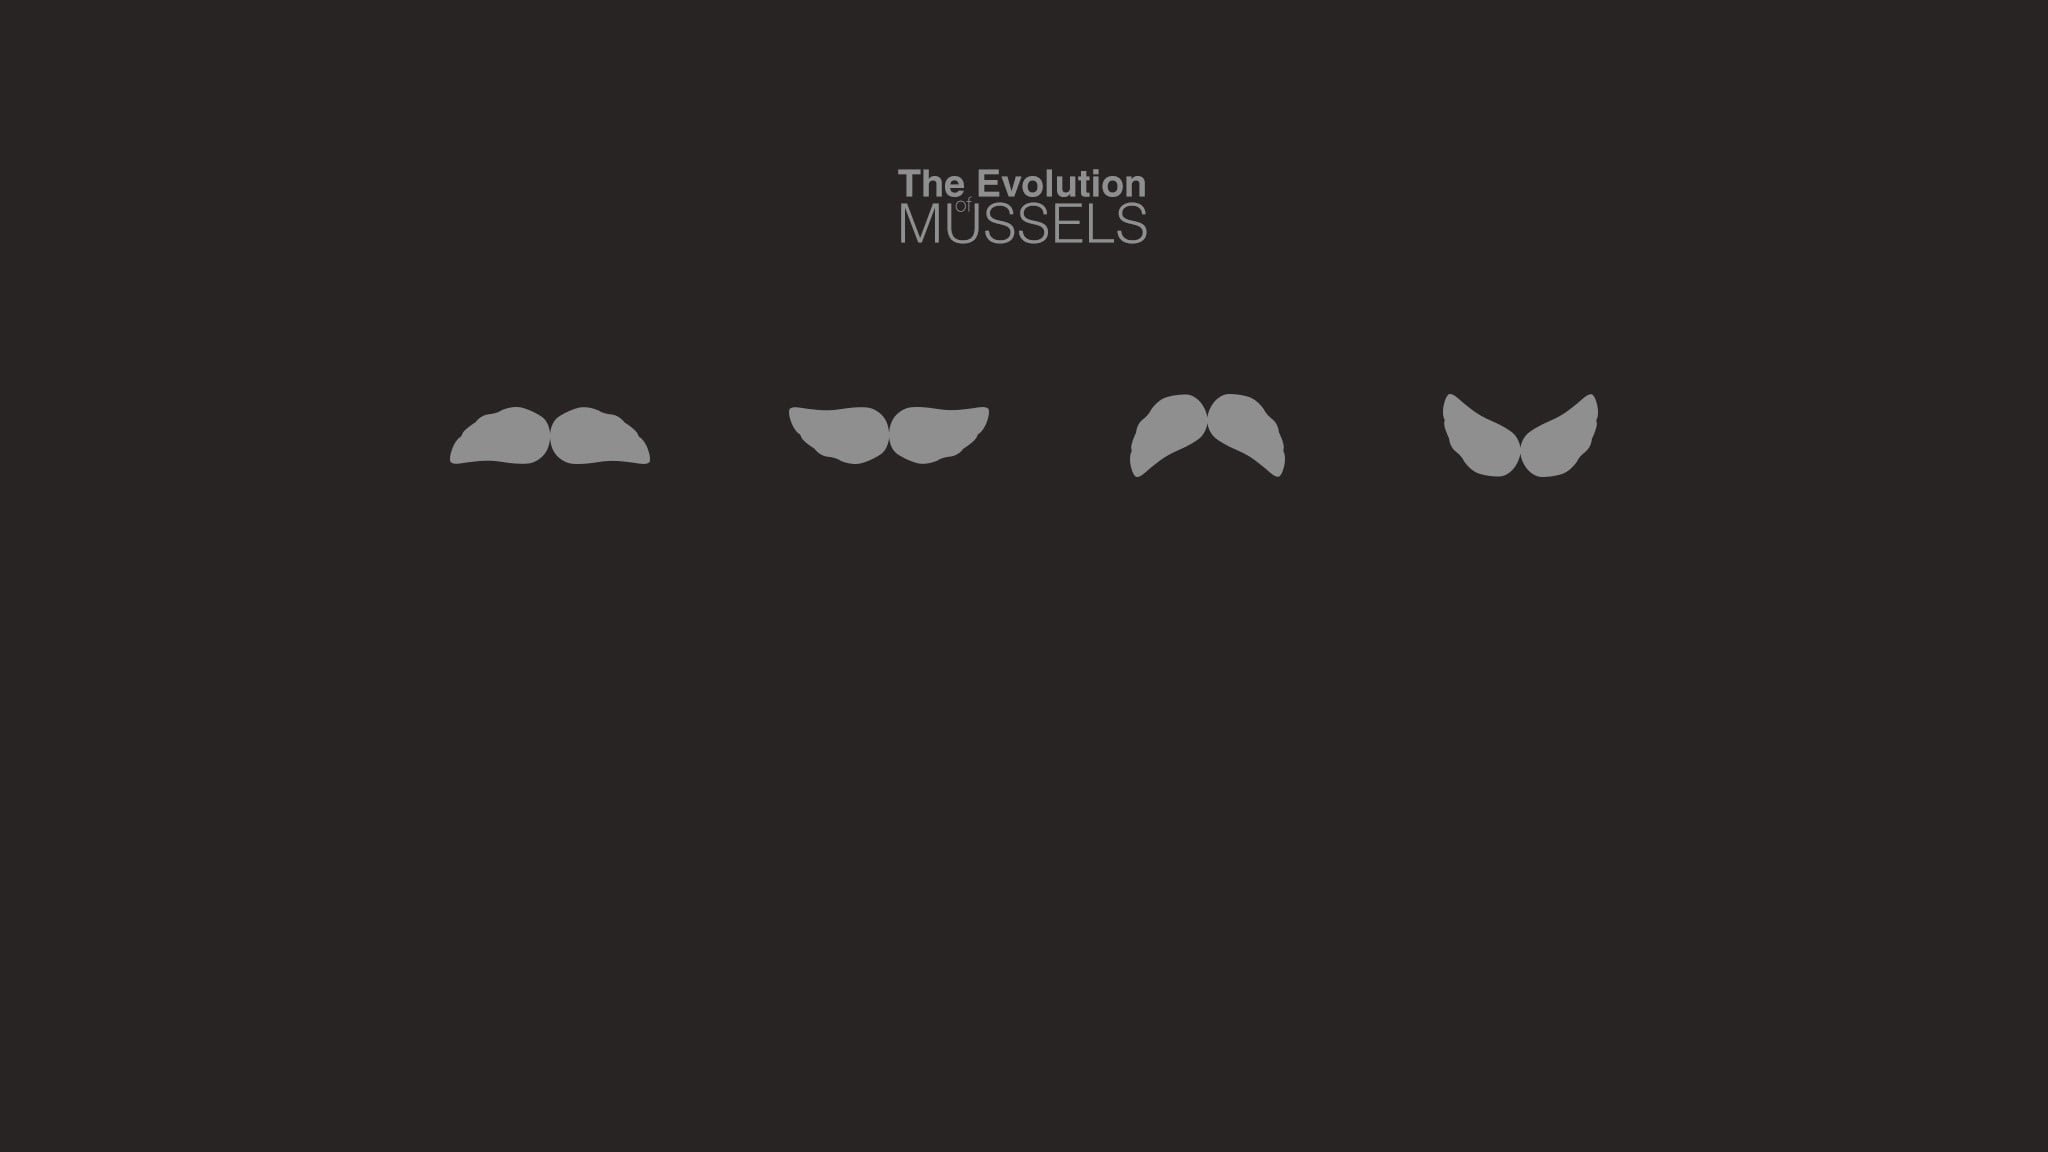 The Evolution Mussels poster